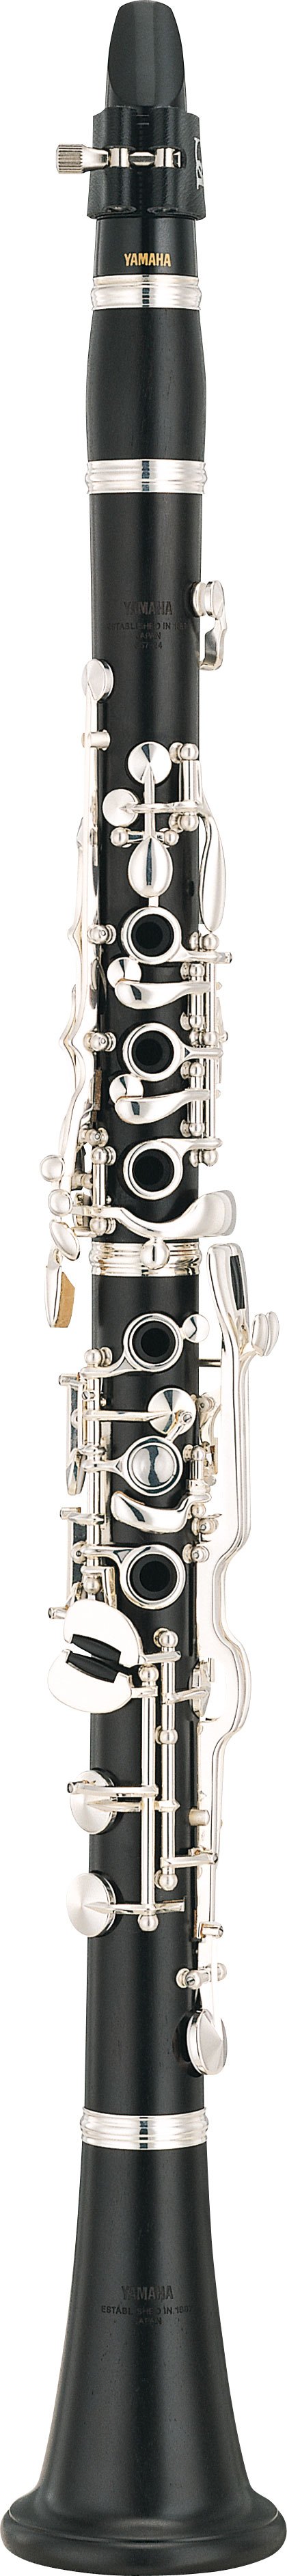 YCL-657/657-24/647 - Overview - Clarinets - Brass & Woodwinds - Musical